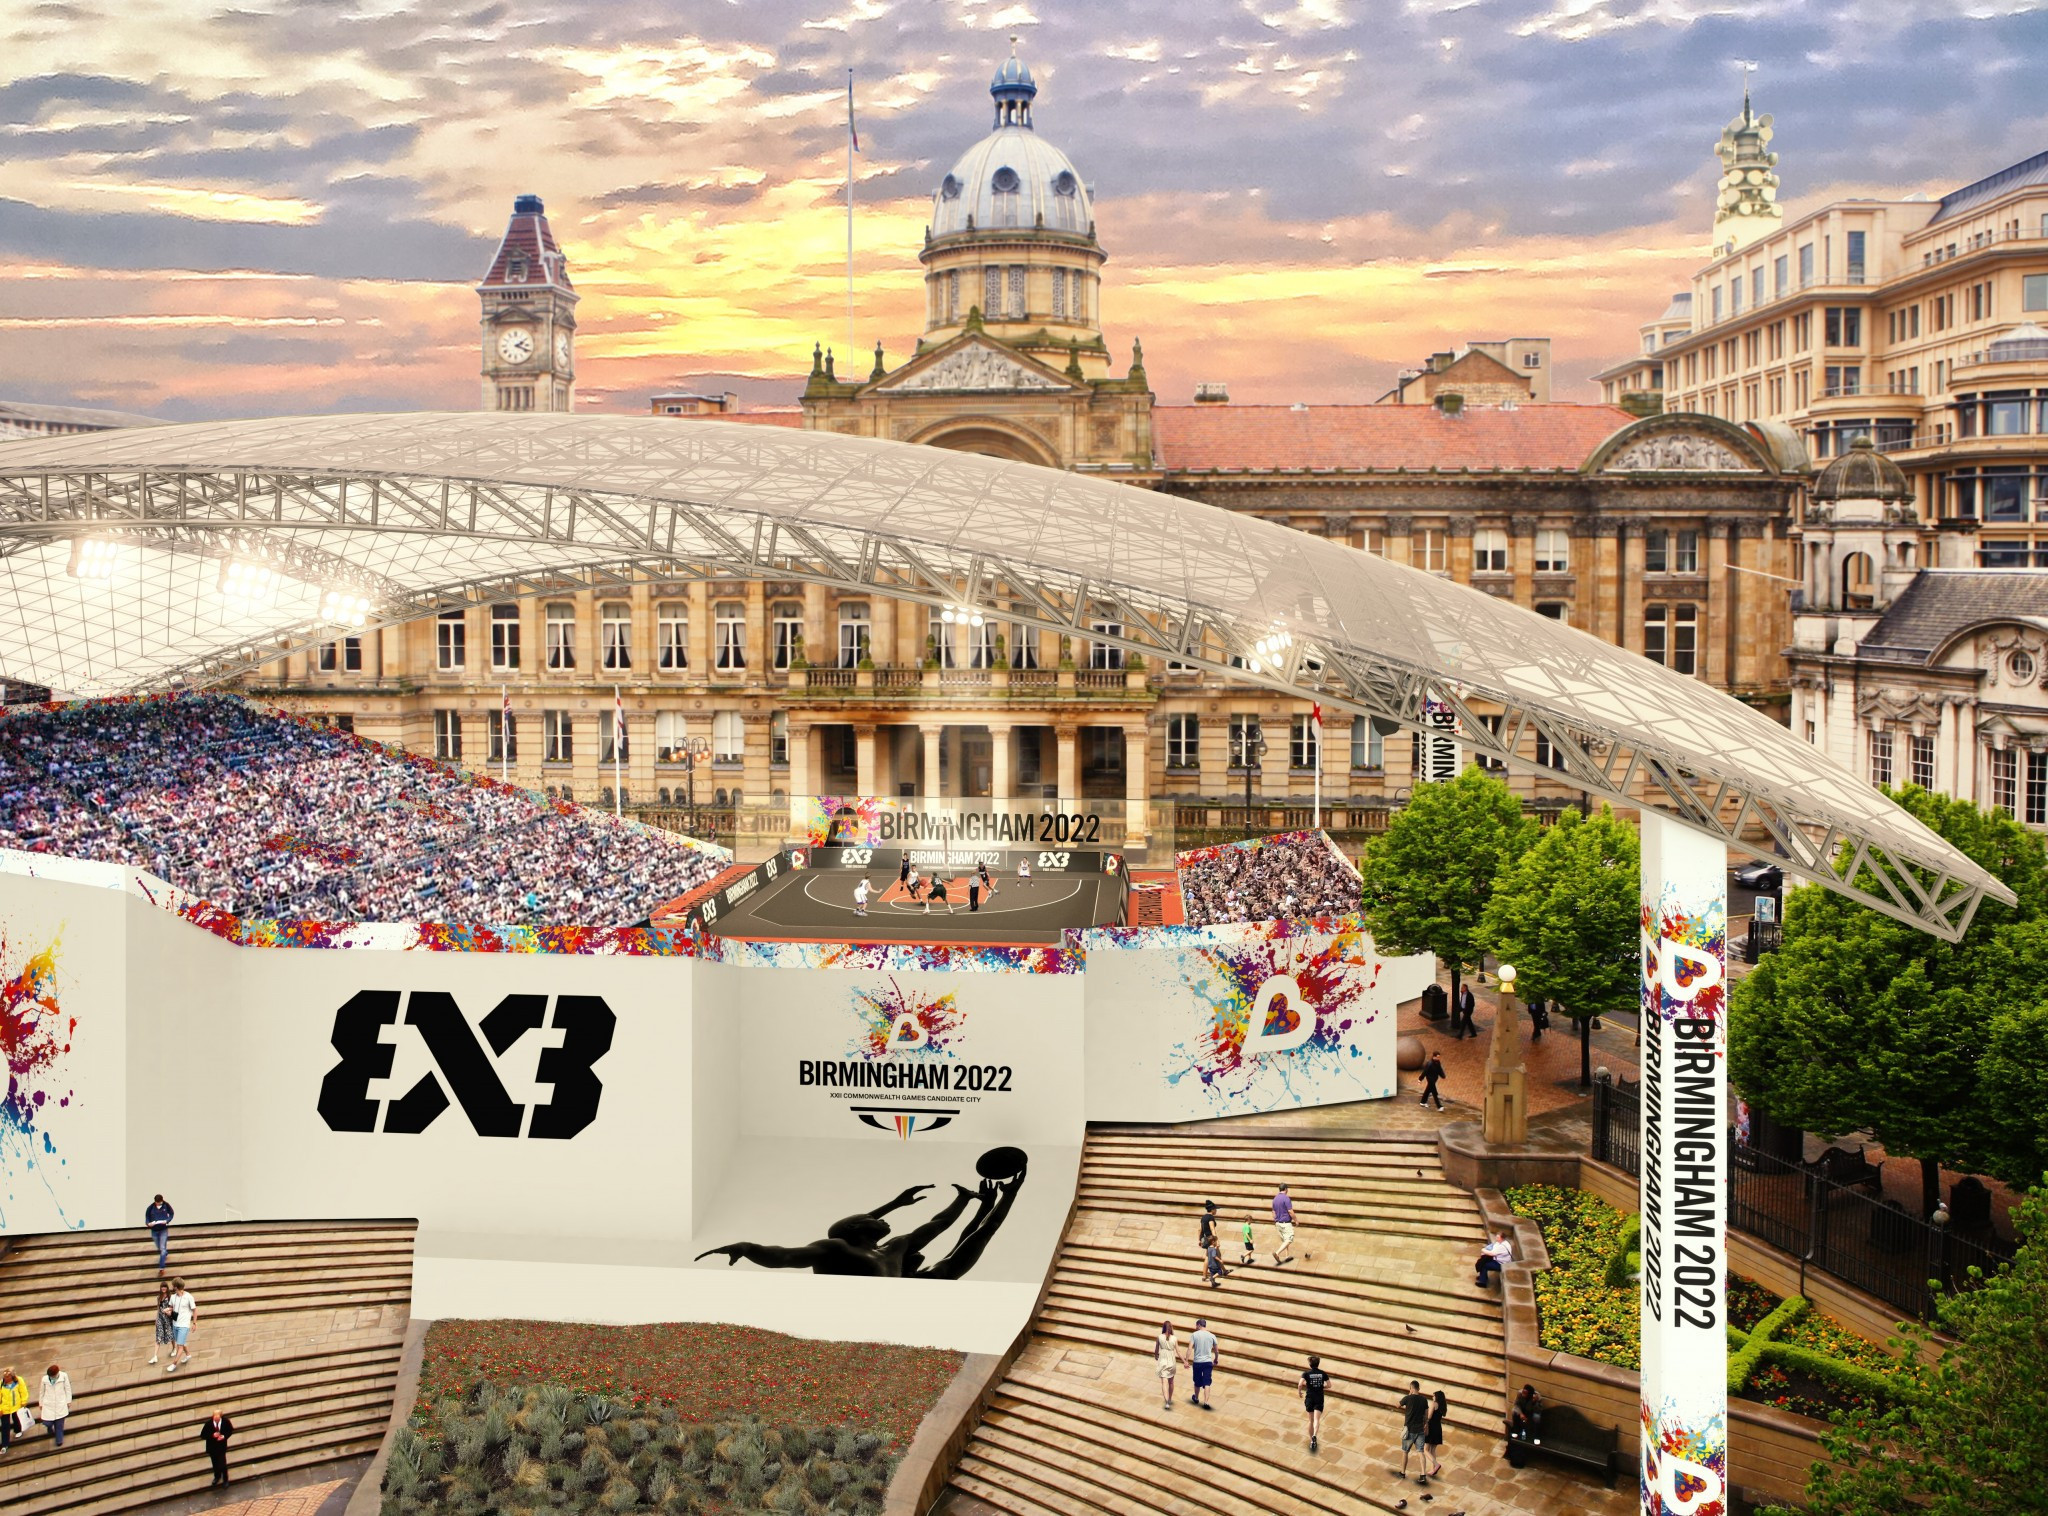 Birmingham will have to wait a few more weeks before it is officially awarded the 2022 Commonwealth Games ©Birmingham 2022